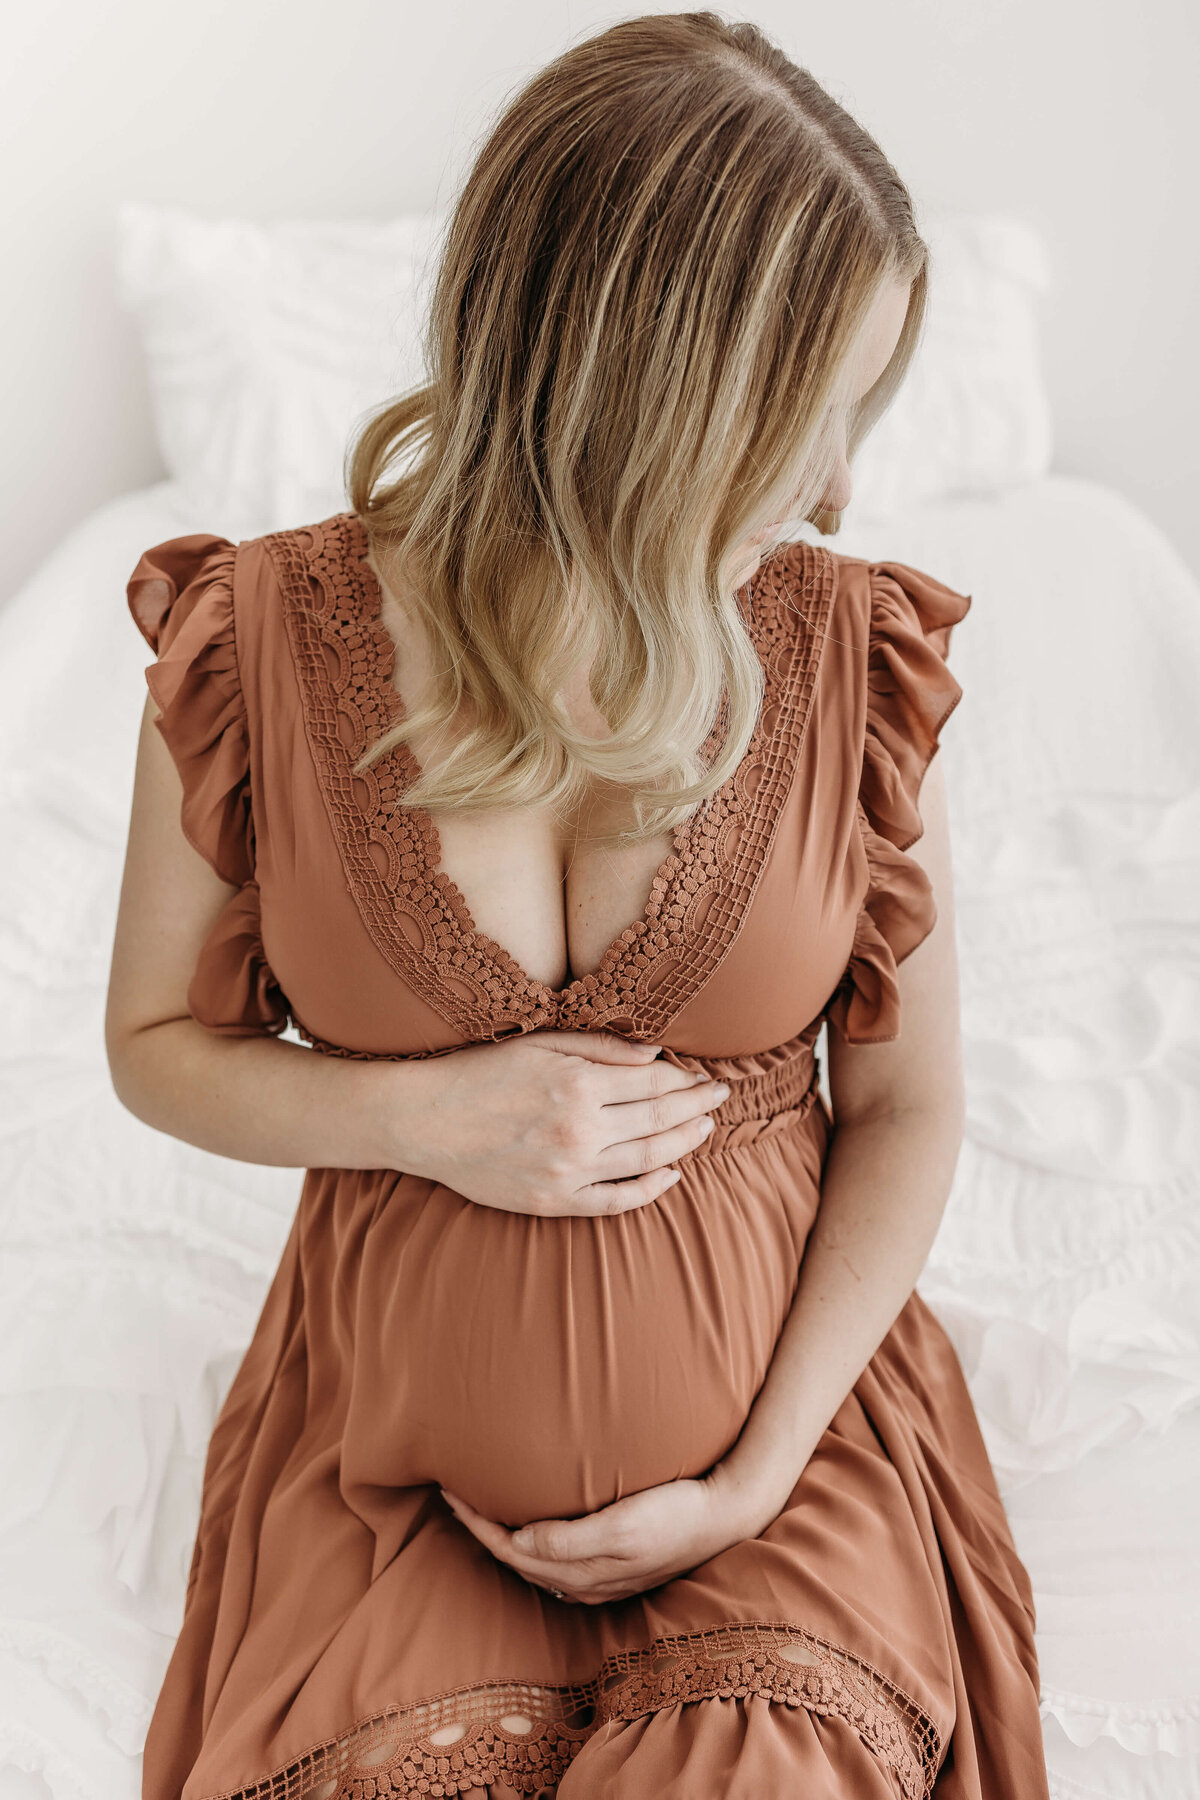 Mom in rust colored dress sitting on bed holding pregnant belly